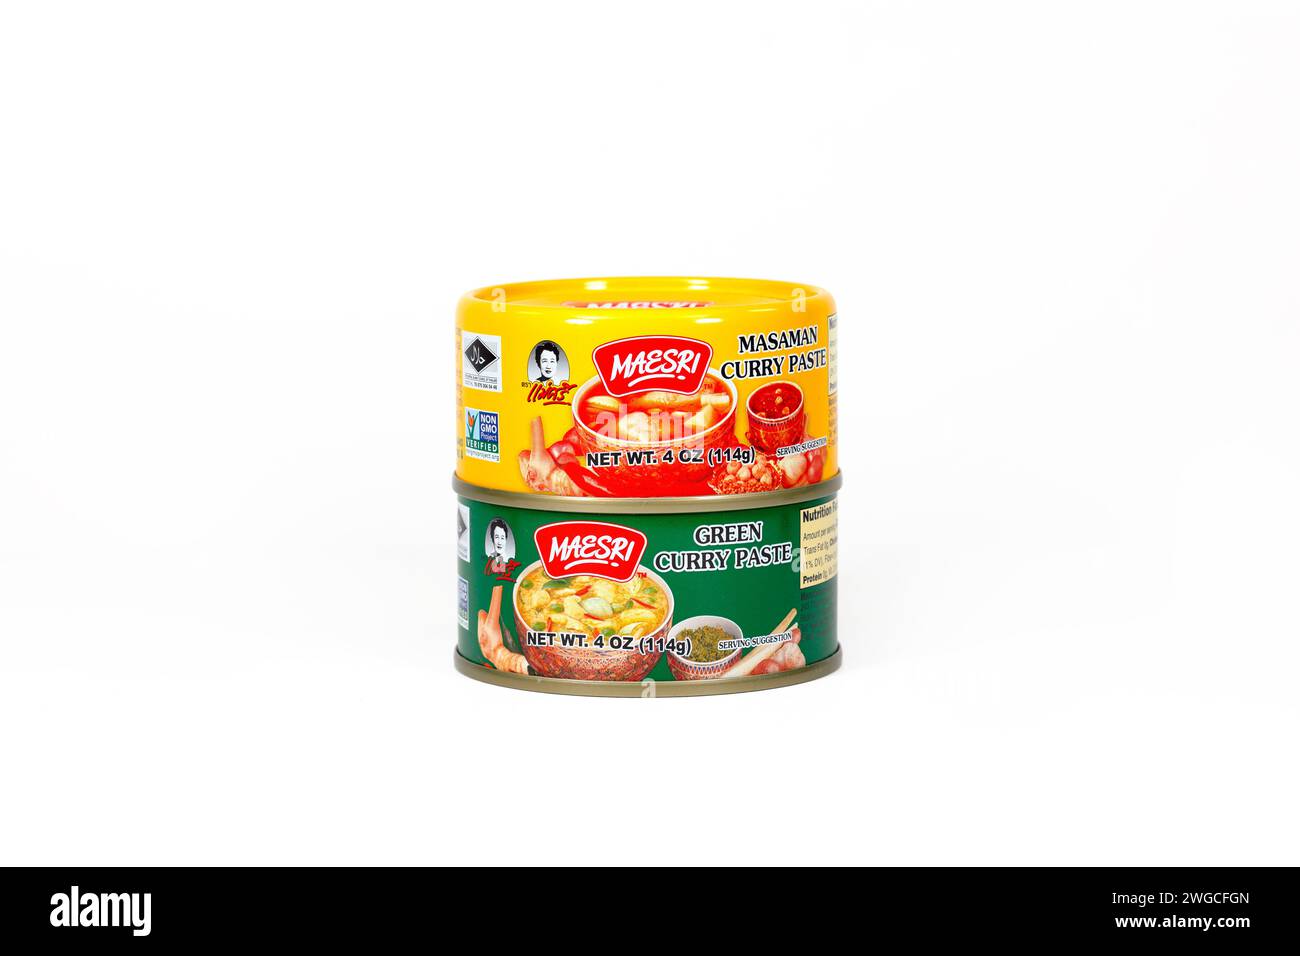 Two cans of Maesri Thai curry paste, Masaman Curry, Green Curry isolated on a white background. cutout for illustration and editorial. Stock Photo